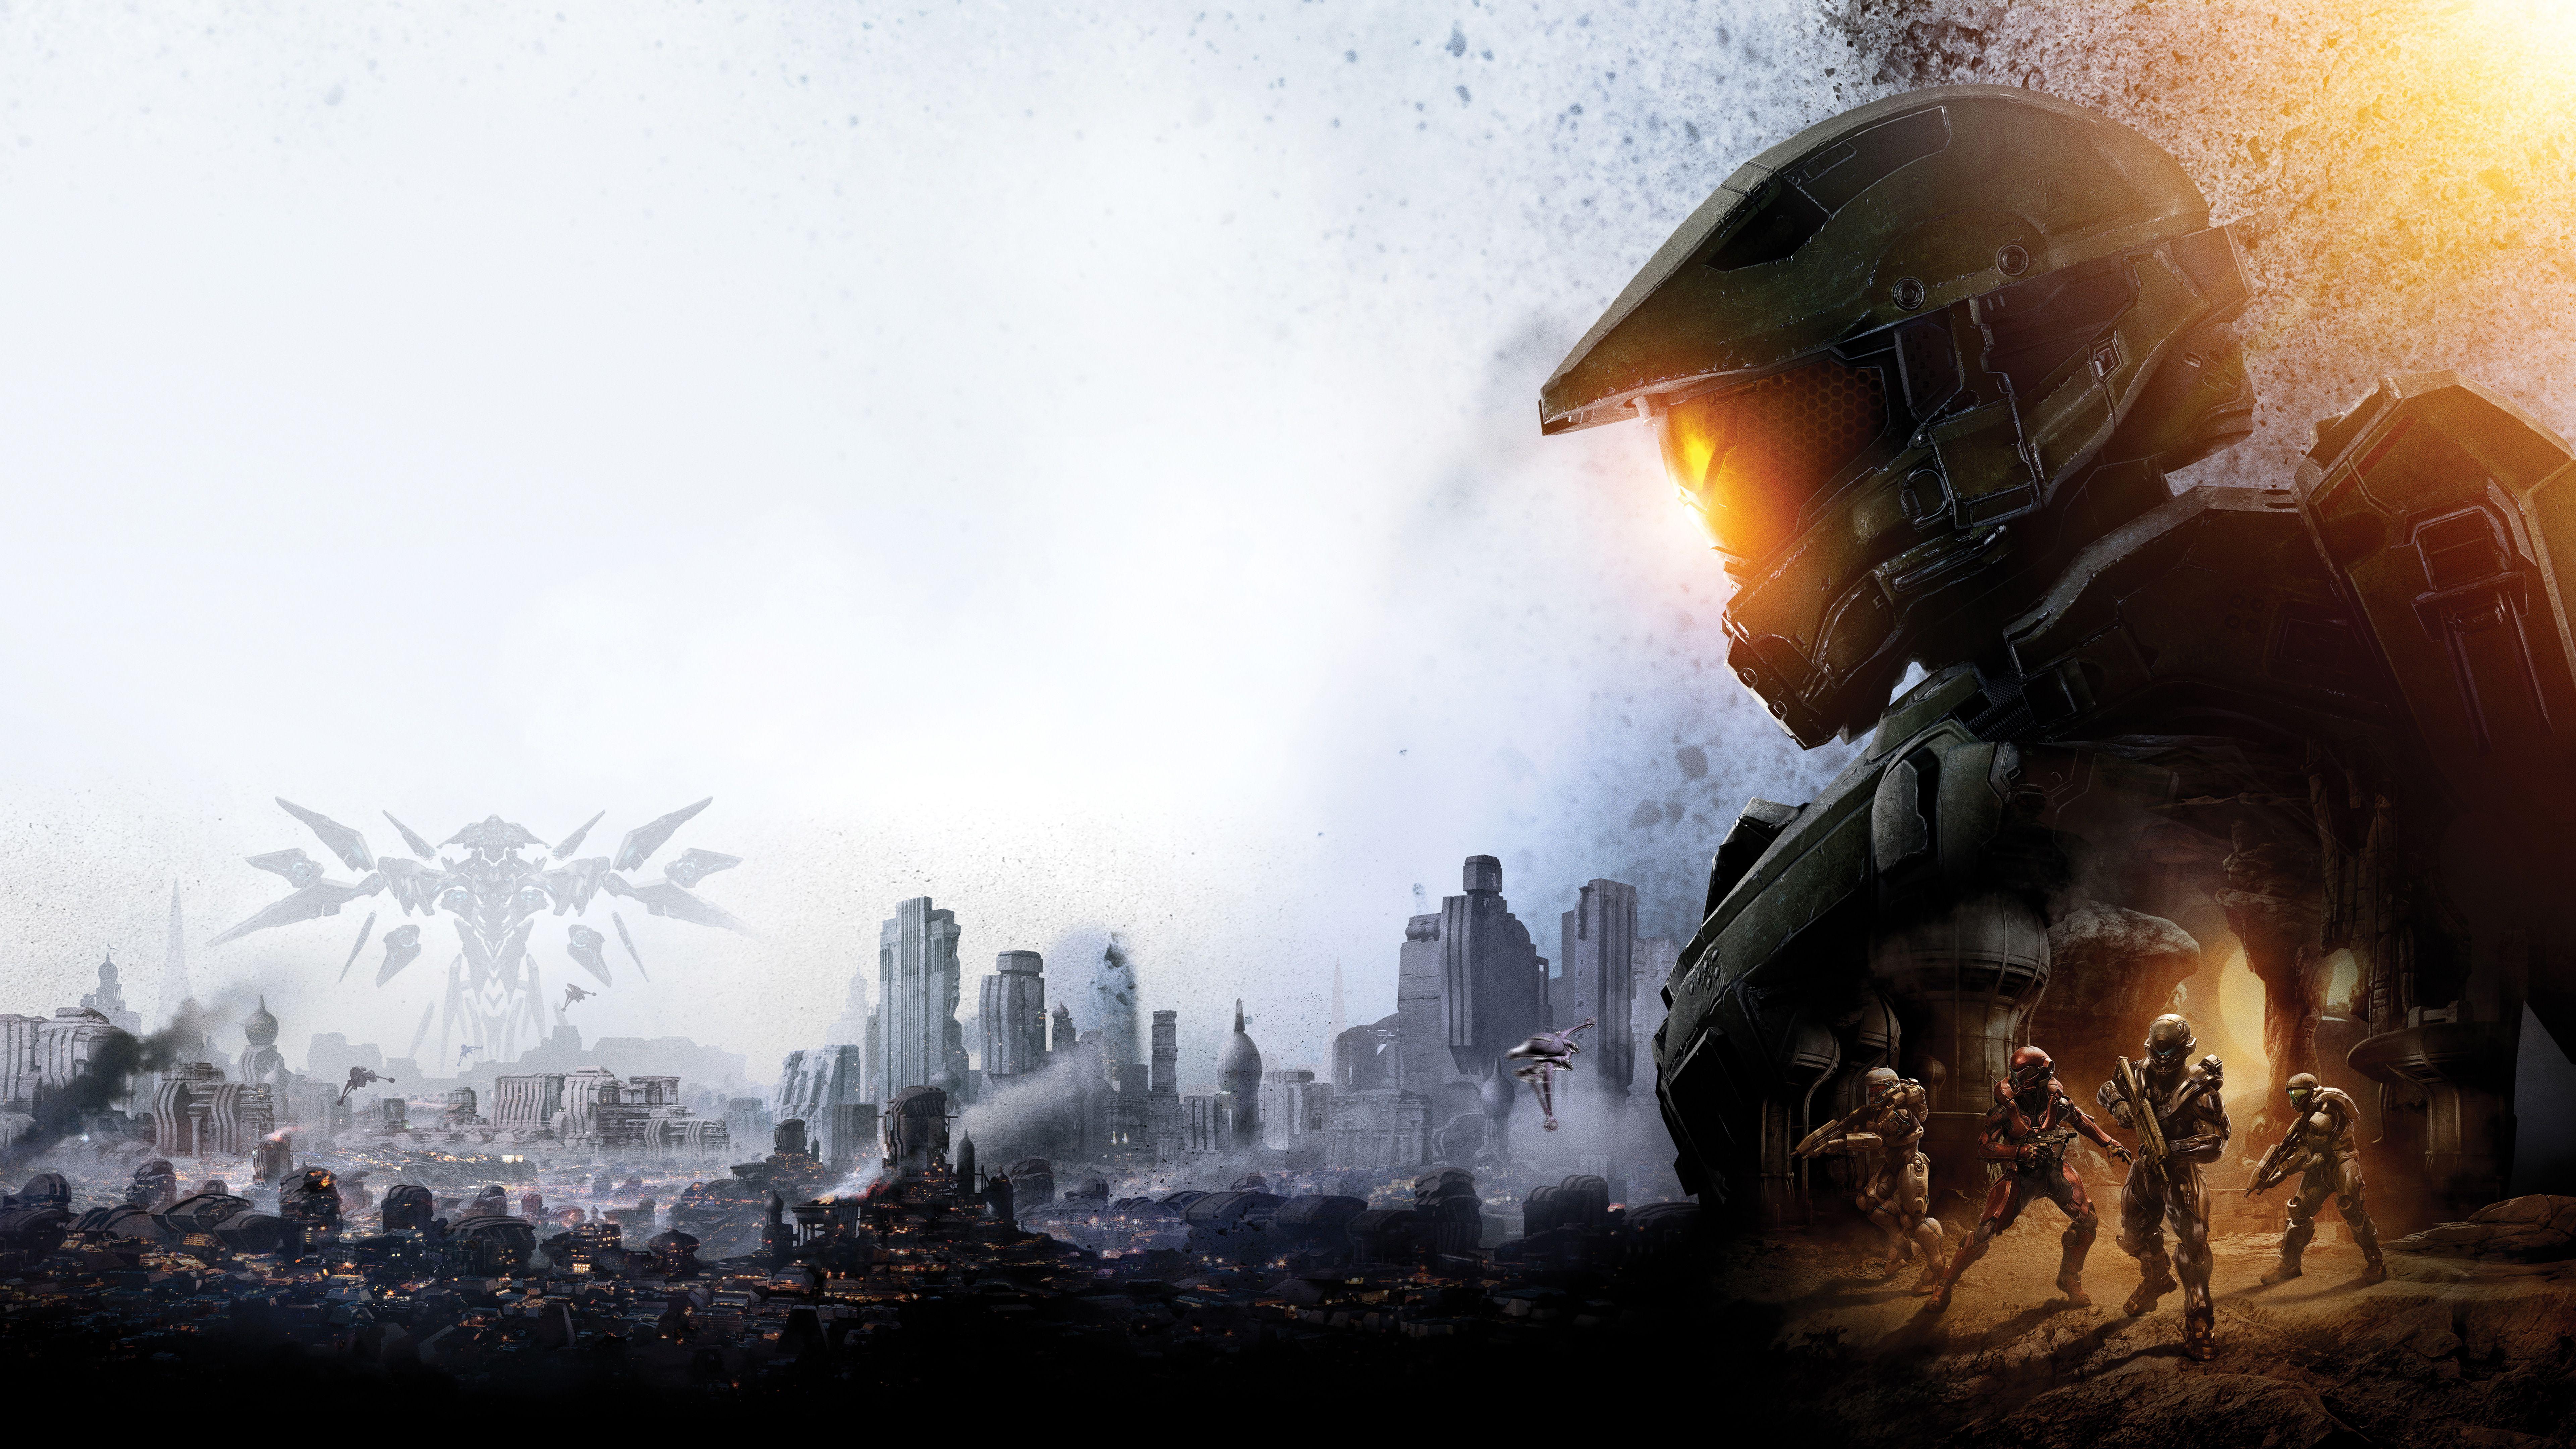 Master Chief Halo 5 8k, HD Games, 4k Wallpaper, Image, Background